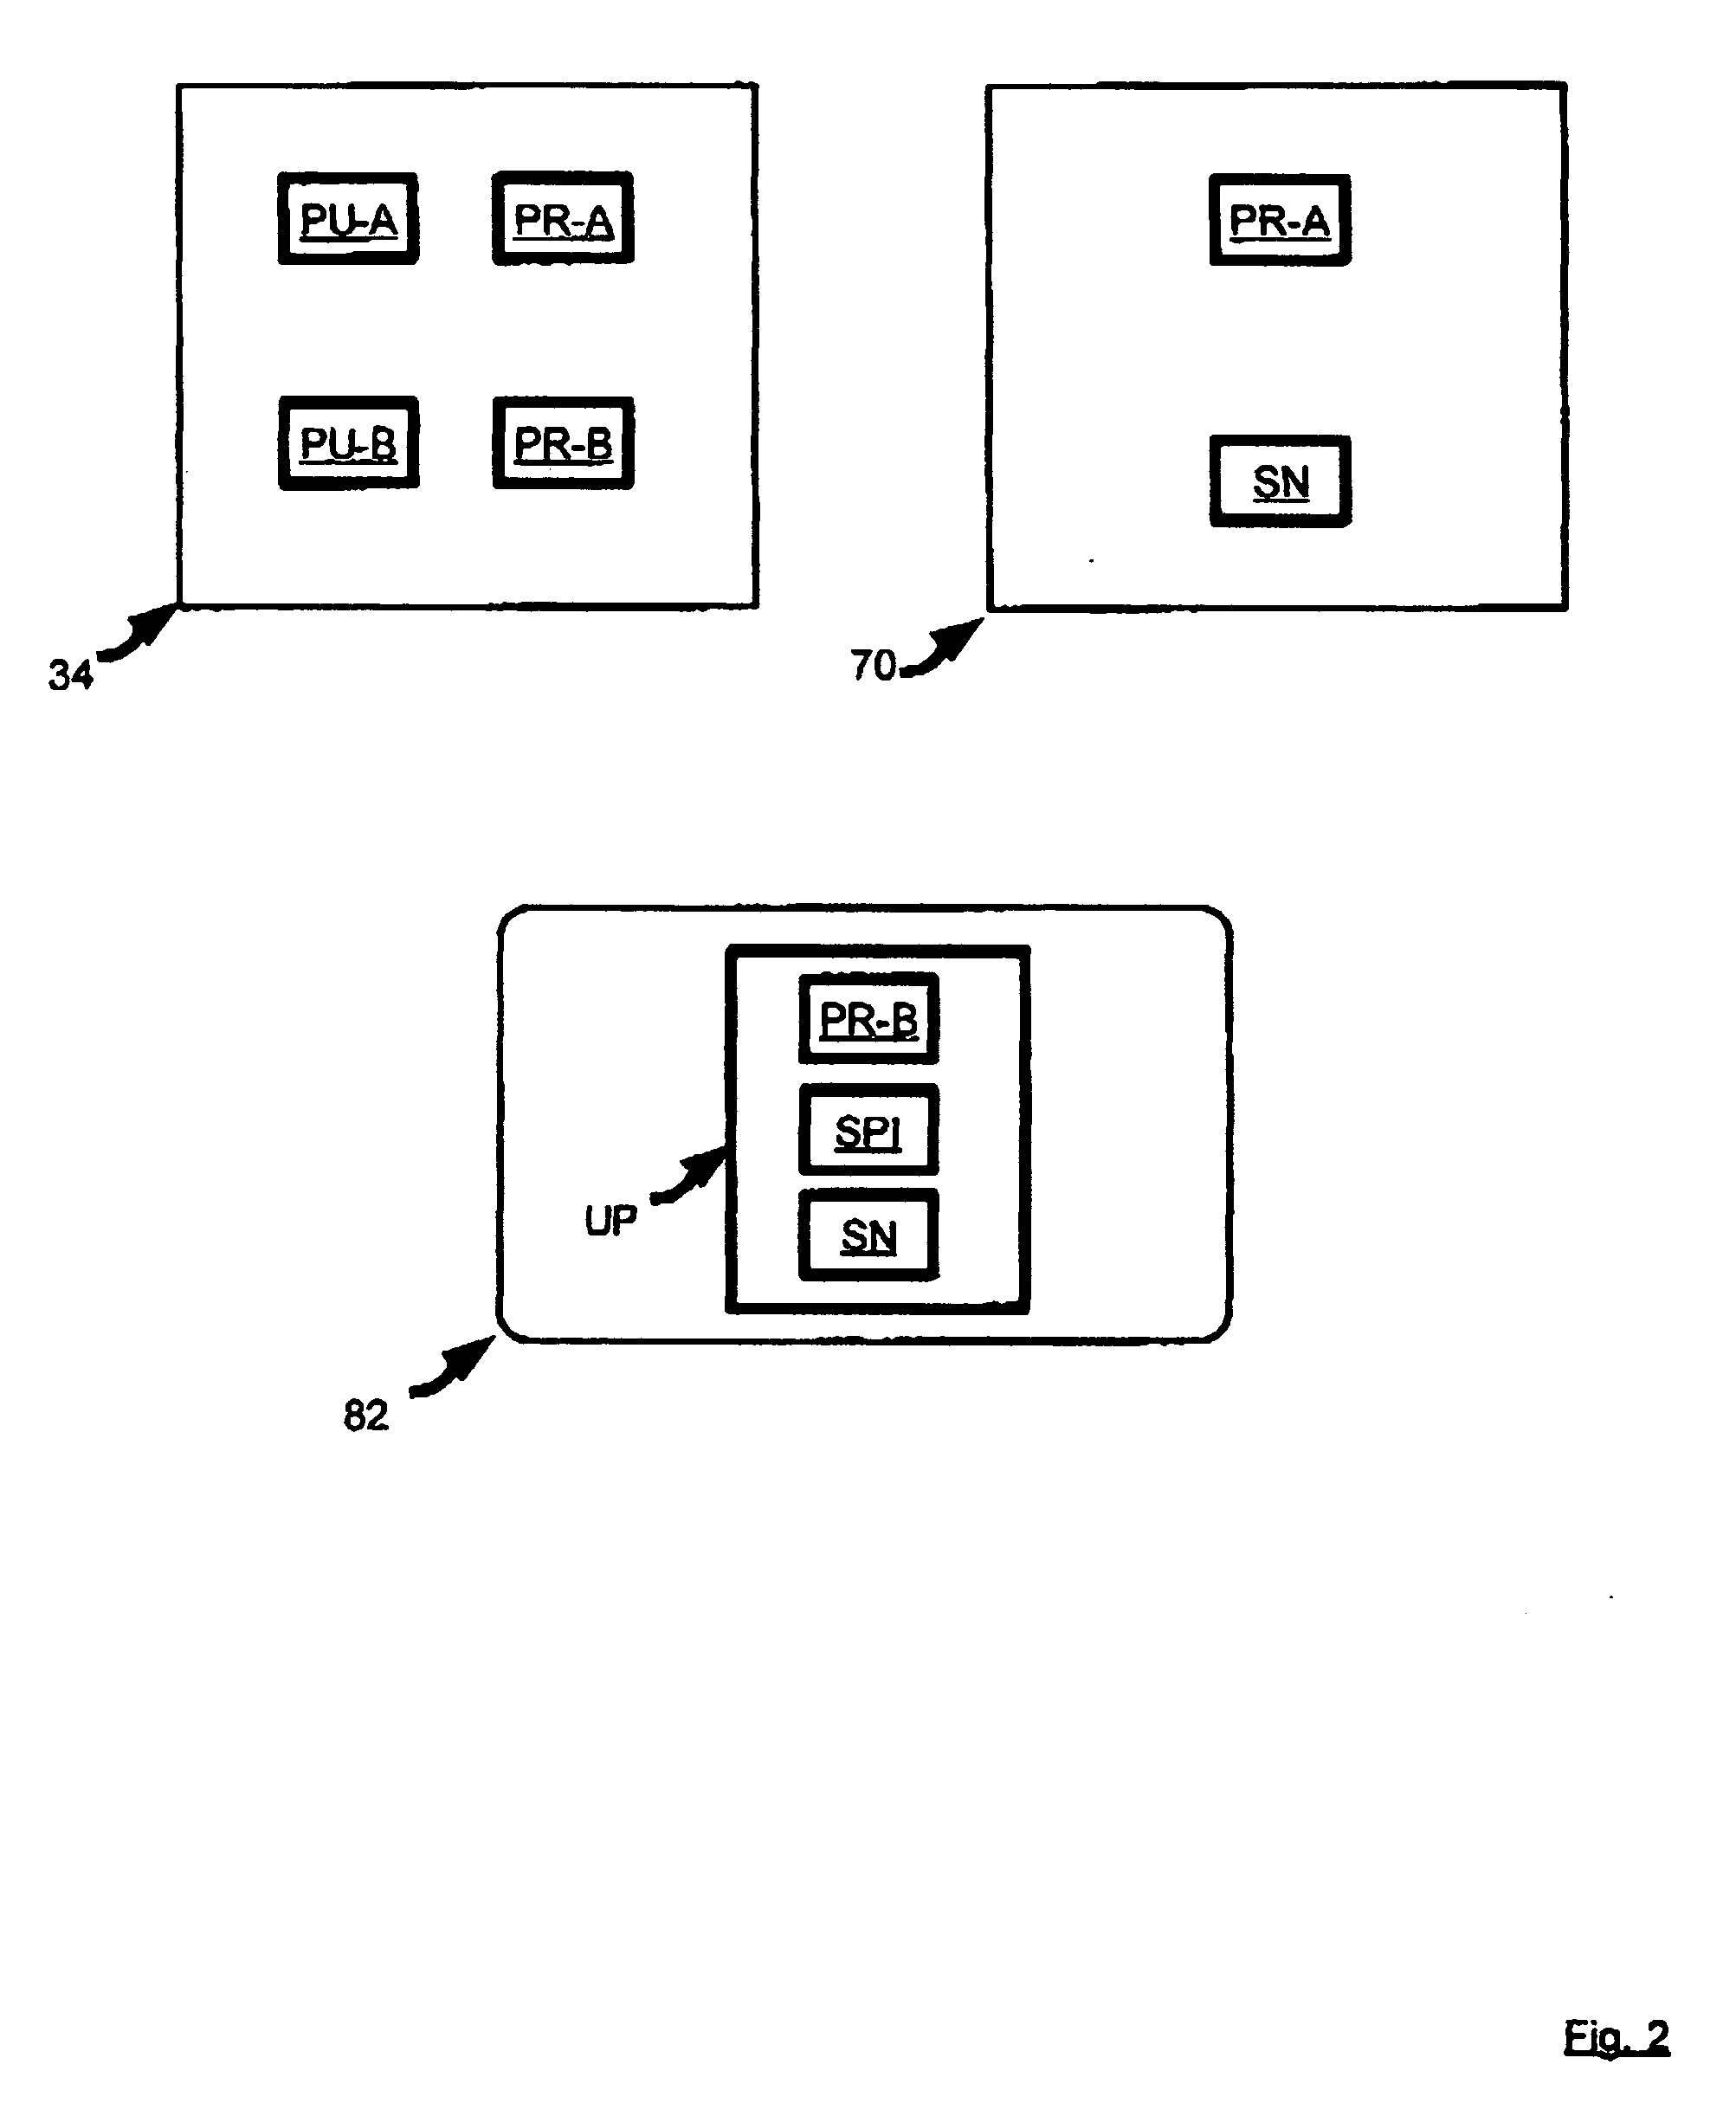 System and method for secure broadcast